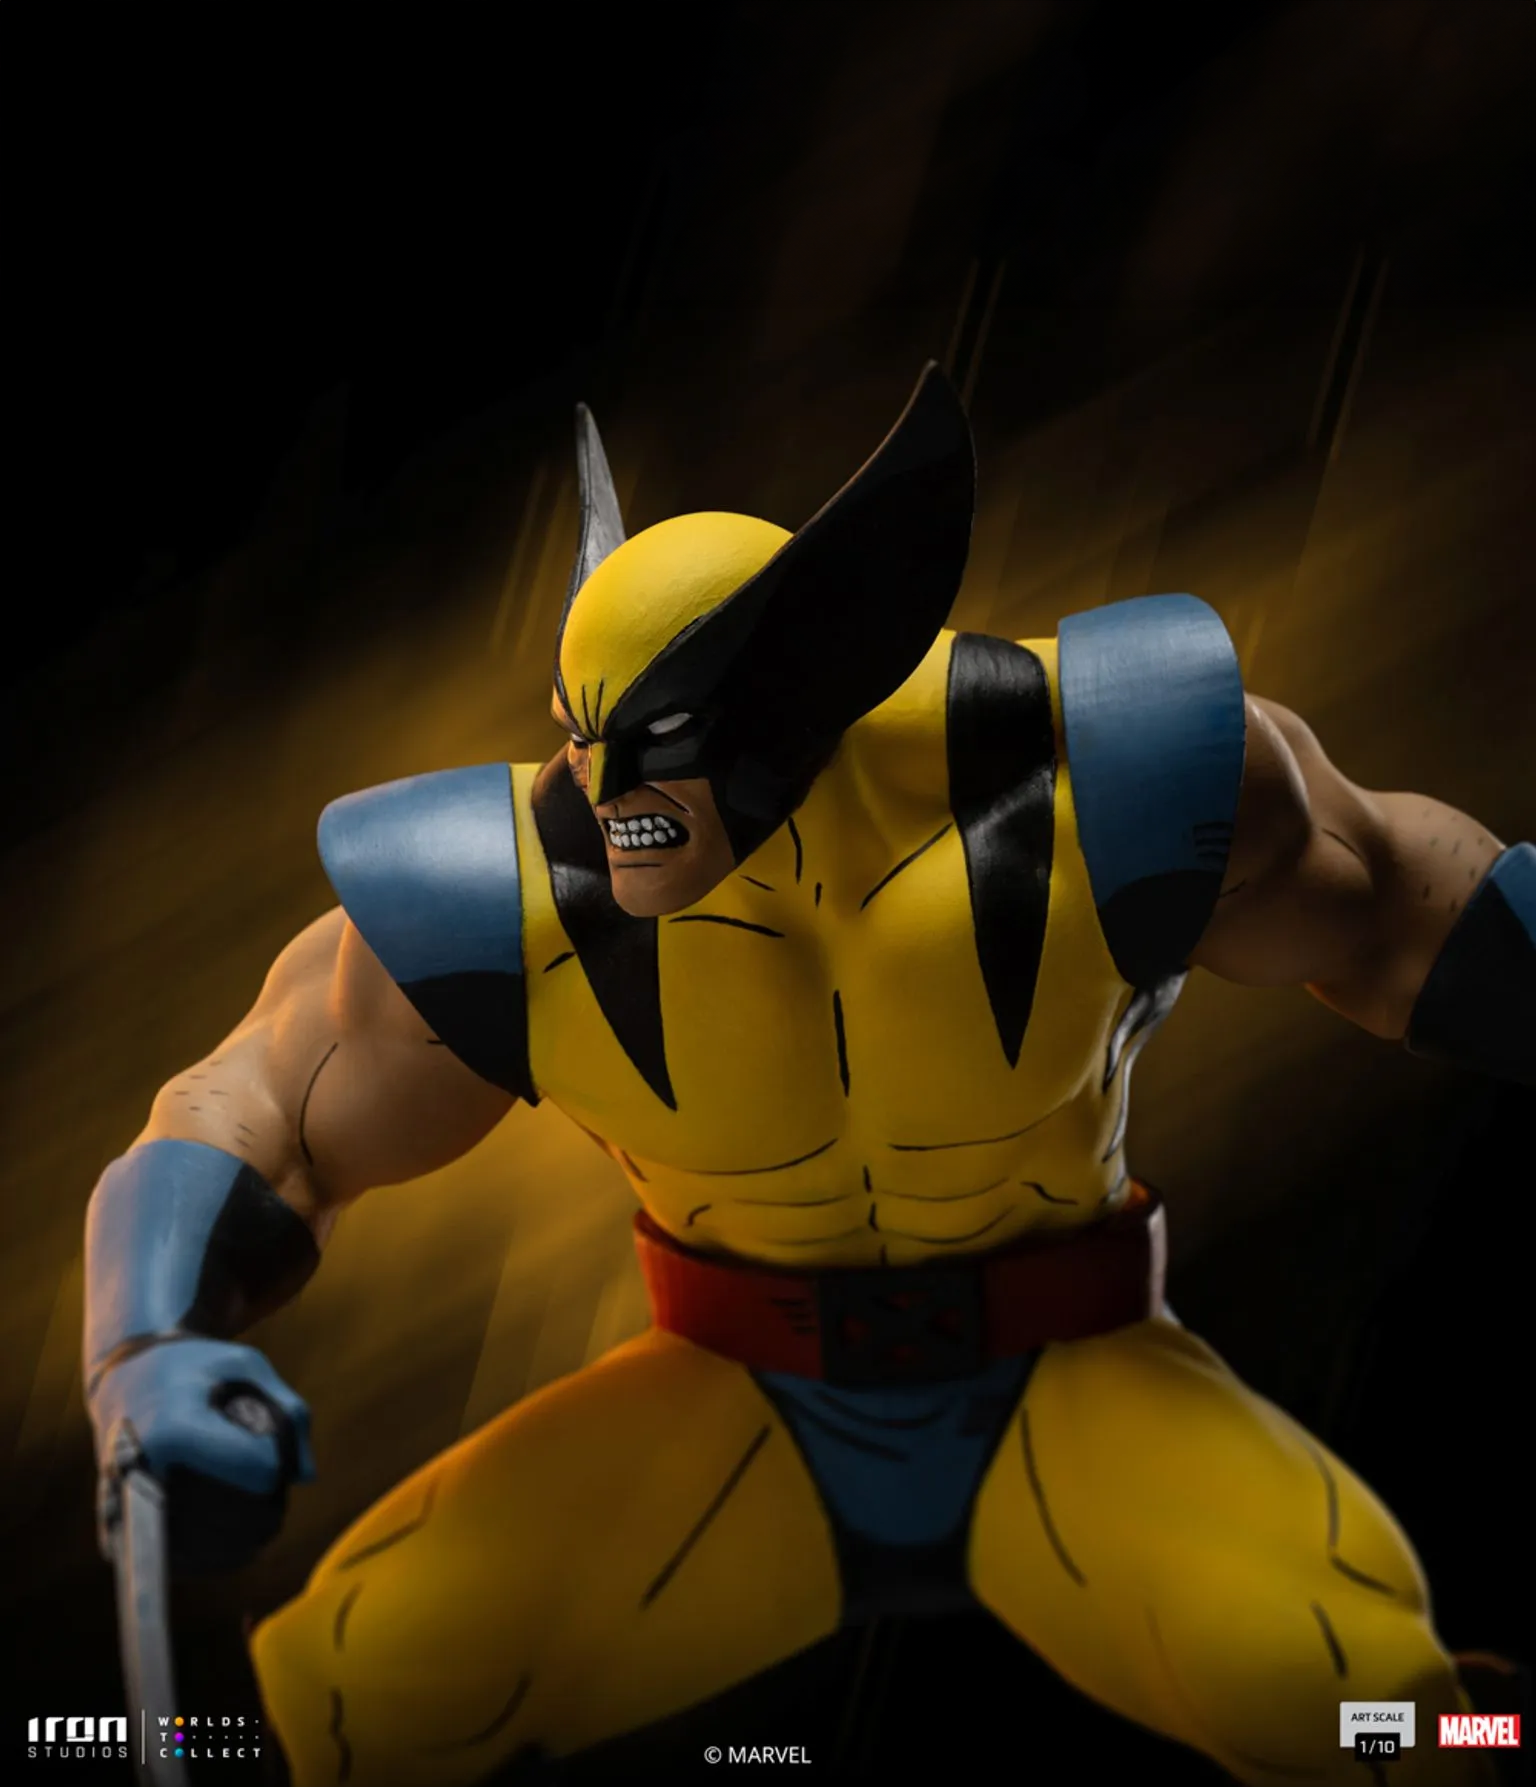 IRON STUDIOS WOLVERINE MARVEL COMICS ART SCALE 1/10 (PRE-ORDER) - Anotoys Collectibles